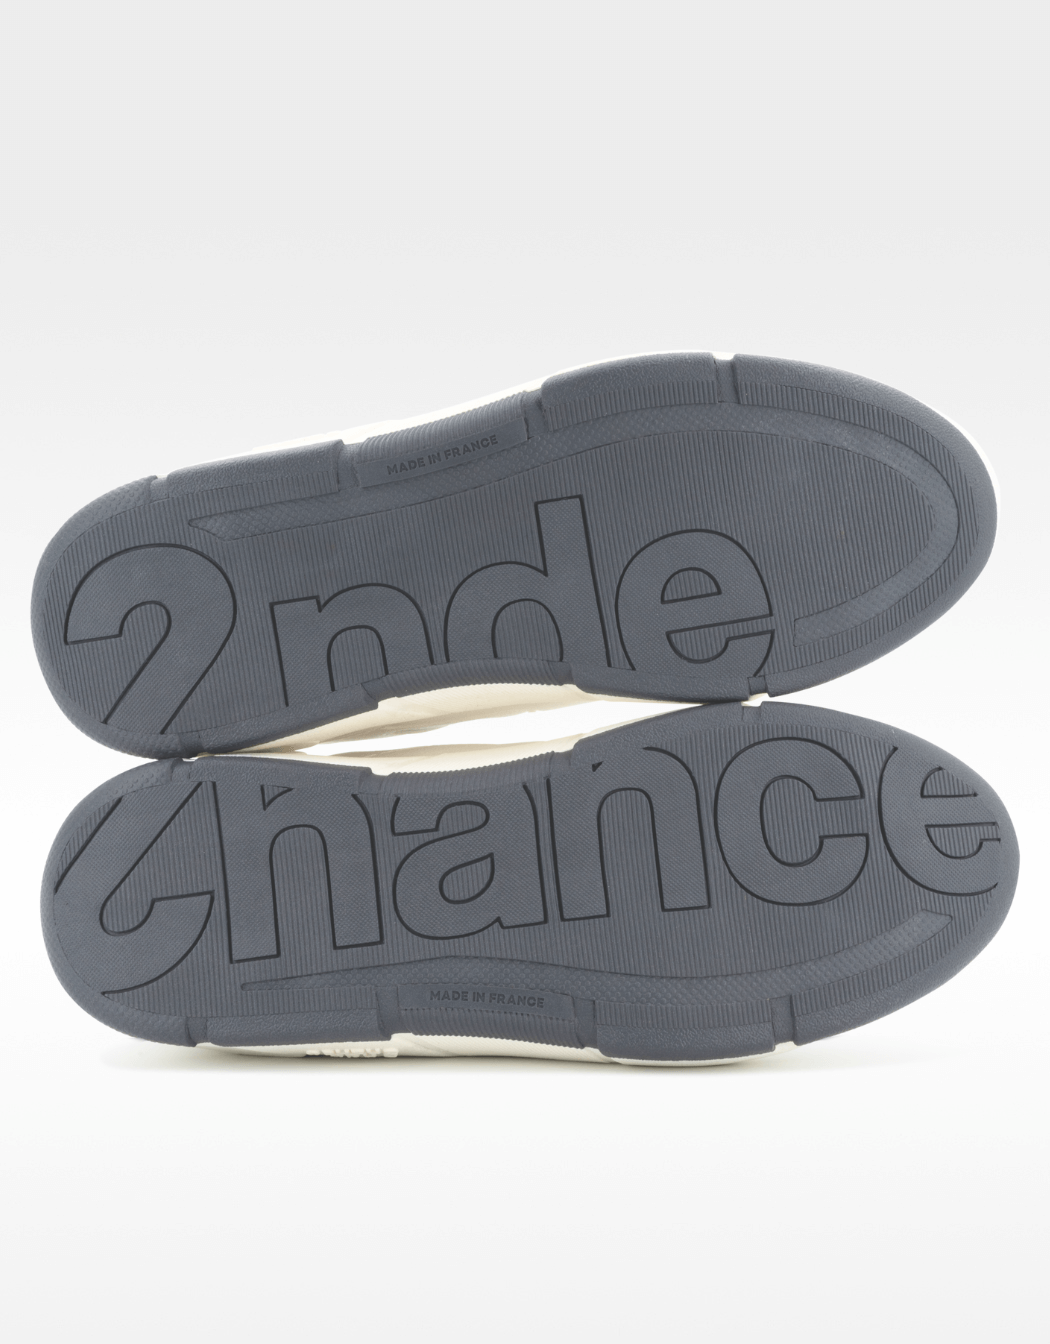 sneakers-neo-loopr3-2ndechance-white-recyclees-recyclable-madeinfrance-ambiance-semelles